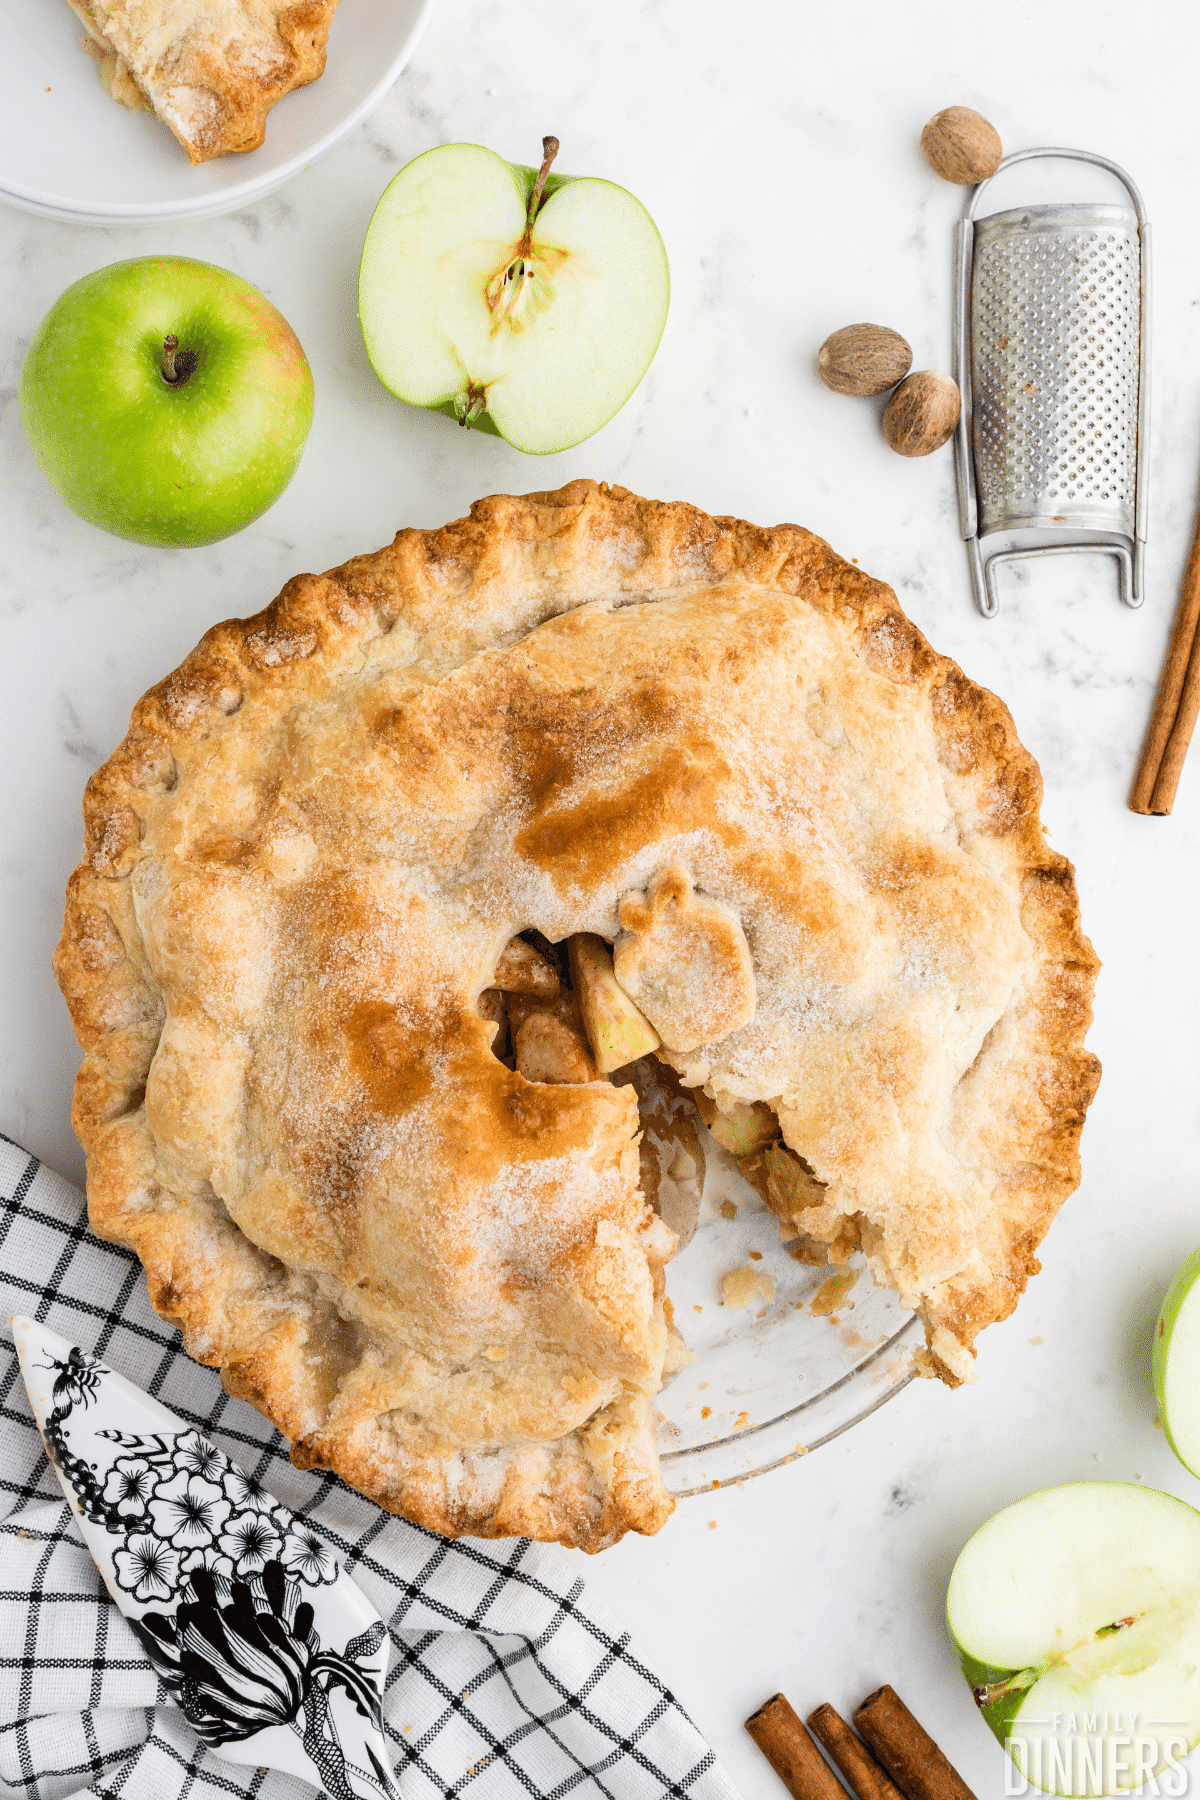 granny smith apple pie with a golden pie crust, one slice missing. Counter surrounding pie has 2 cut apples, some nutmegs and cinnamon sticks and a metal tool for shredding the nutmeg.